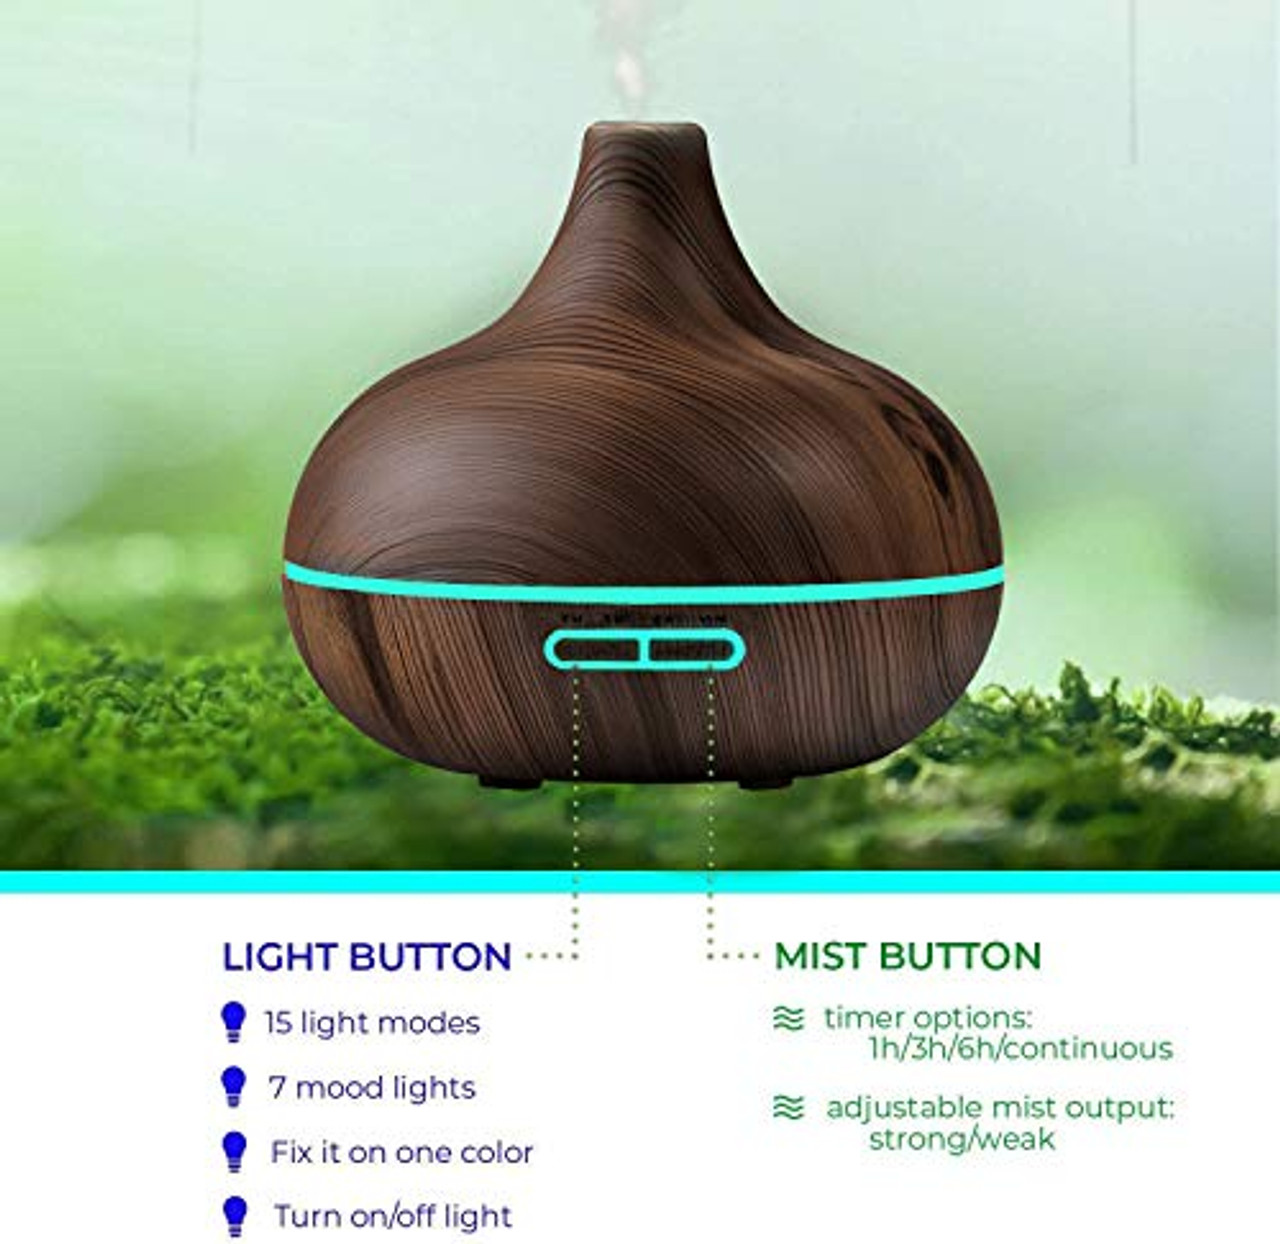 Ultimate Aromatherapy Diffuser & Essential Oil Set - Ultrasonic Top 10 Oils  Modern with 4 Timer 7 Ambient Light Settings Therapeutic Grade Lavender